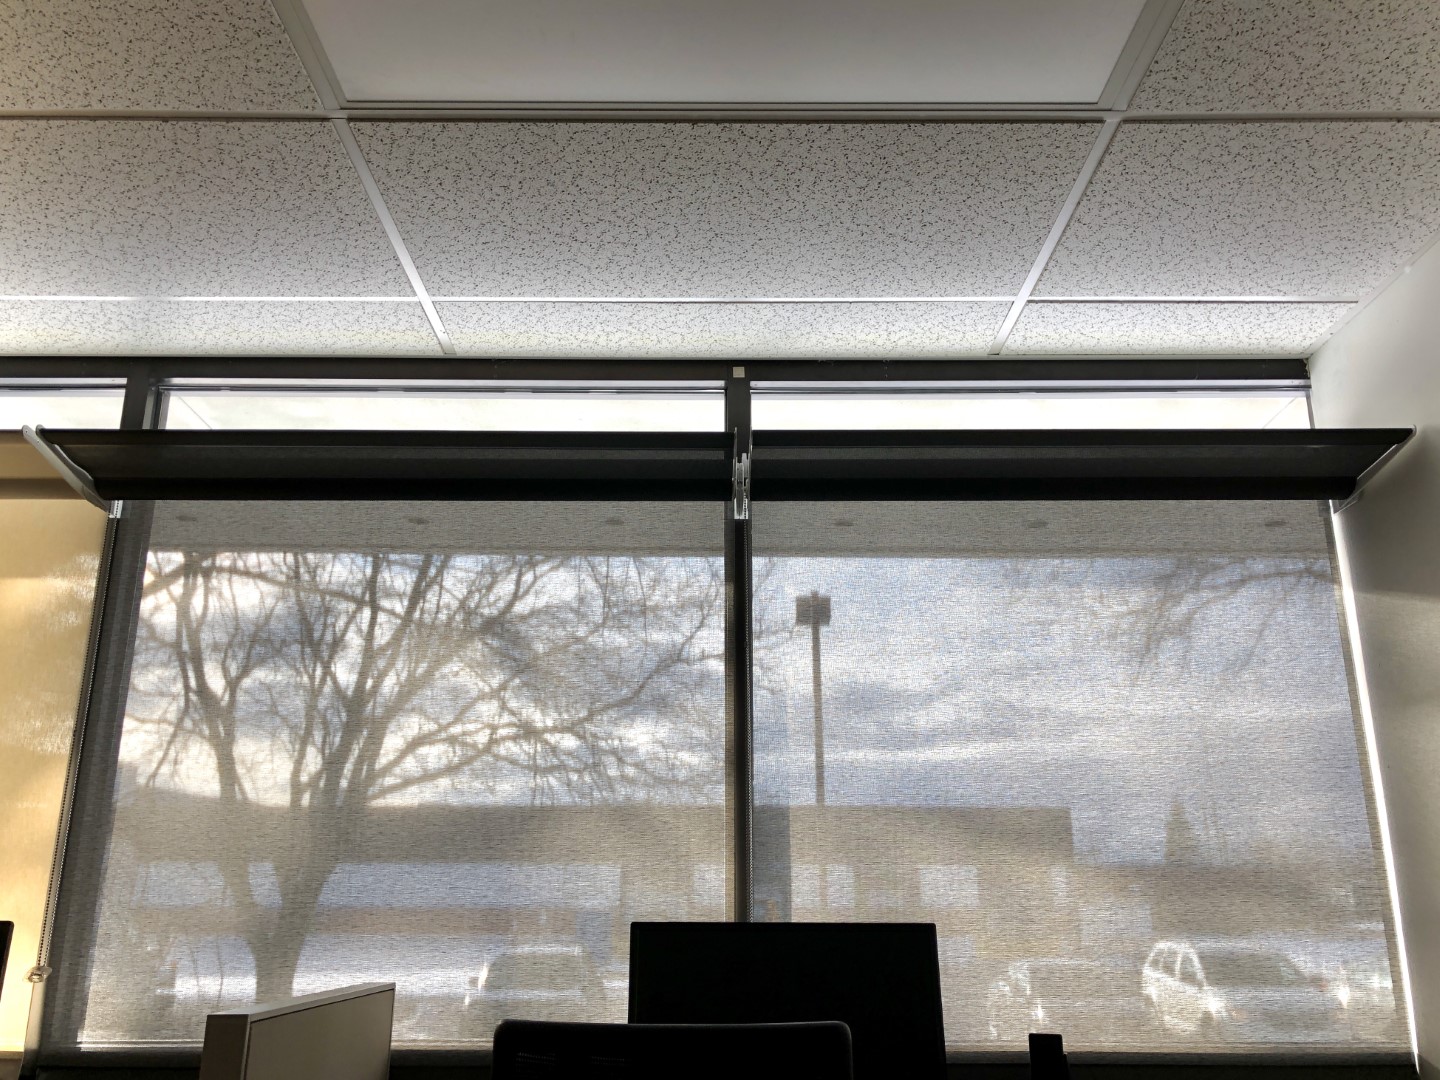 Office with translucent shades. Daylight is significantly reduced, but light shelves still reflect daylight across the ceiling.